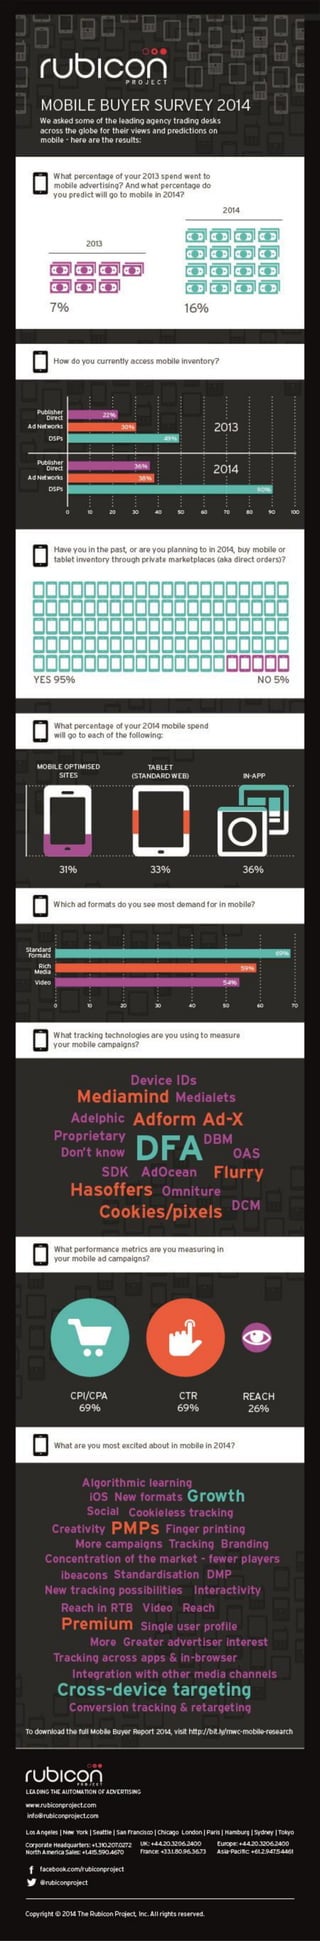 Mobile Ad Buyer Survey by Rubicon